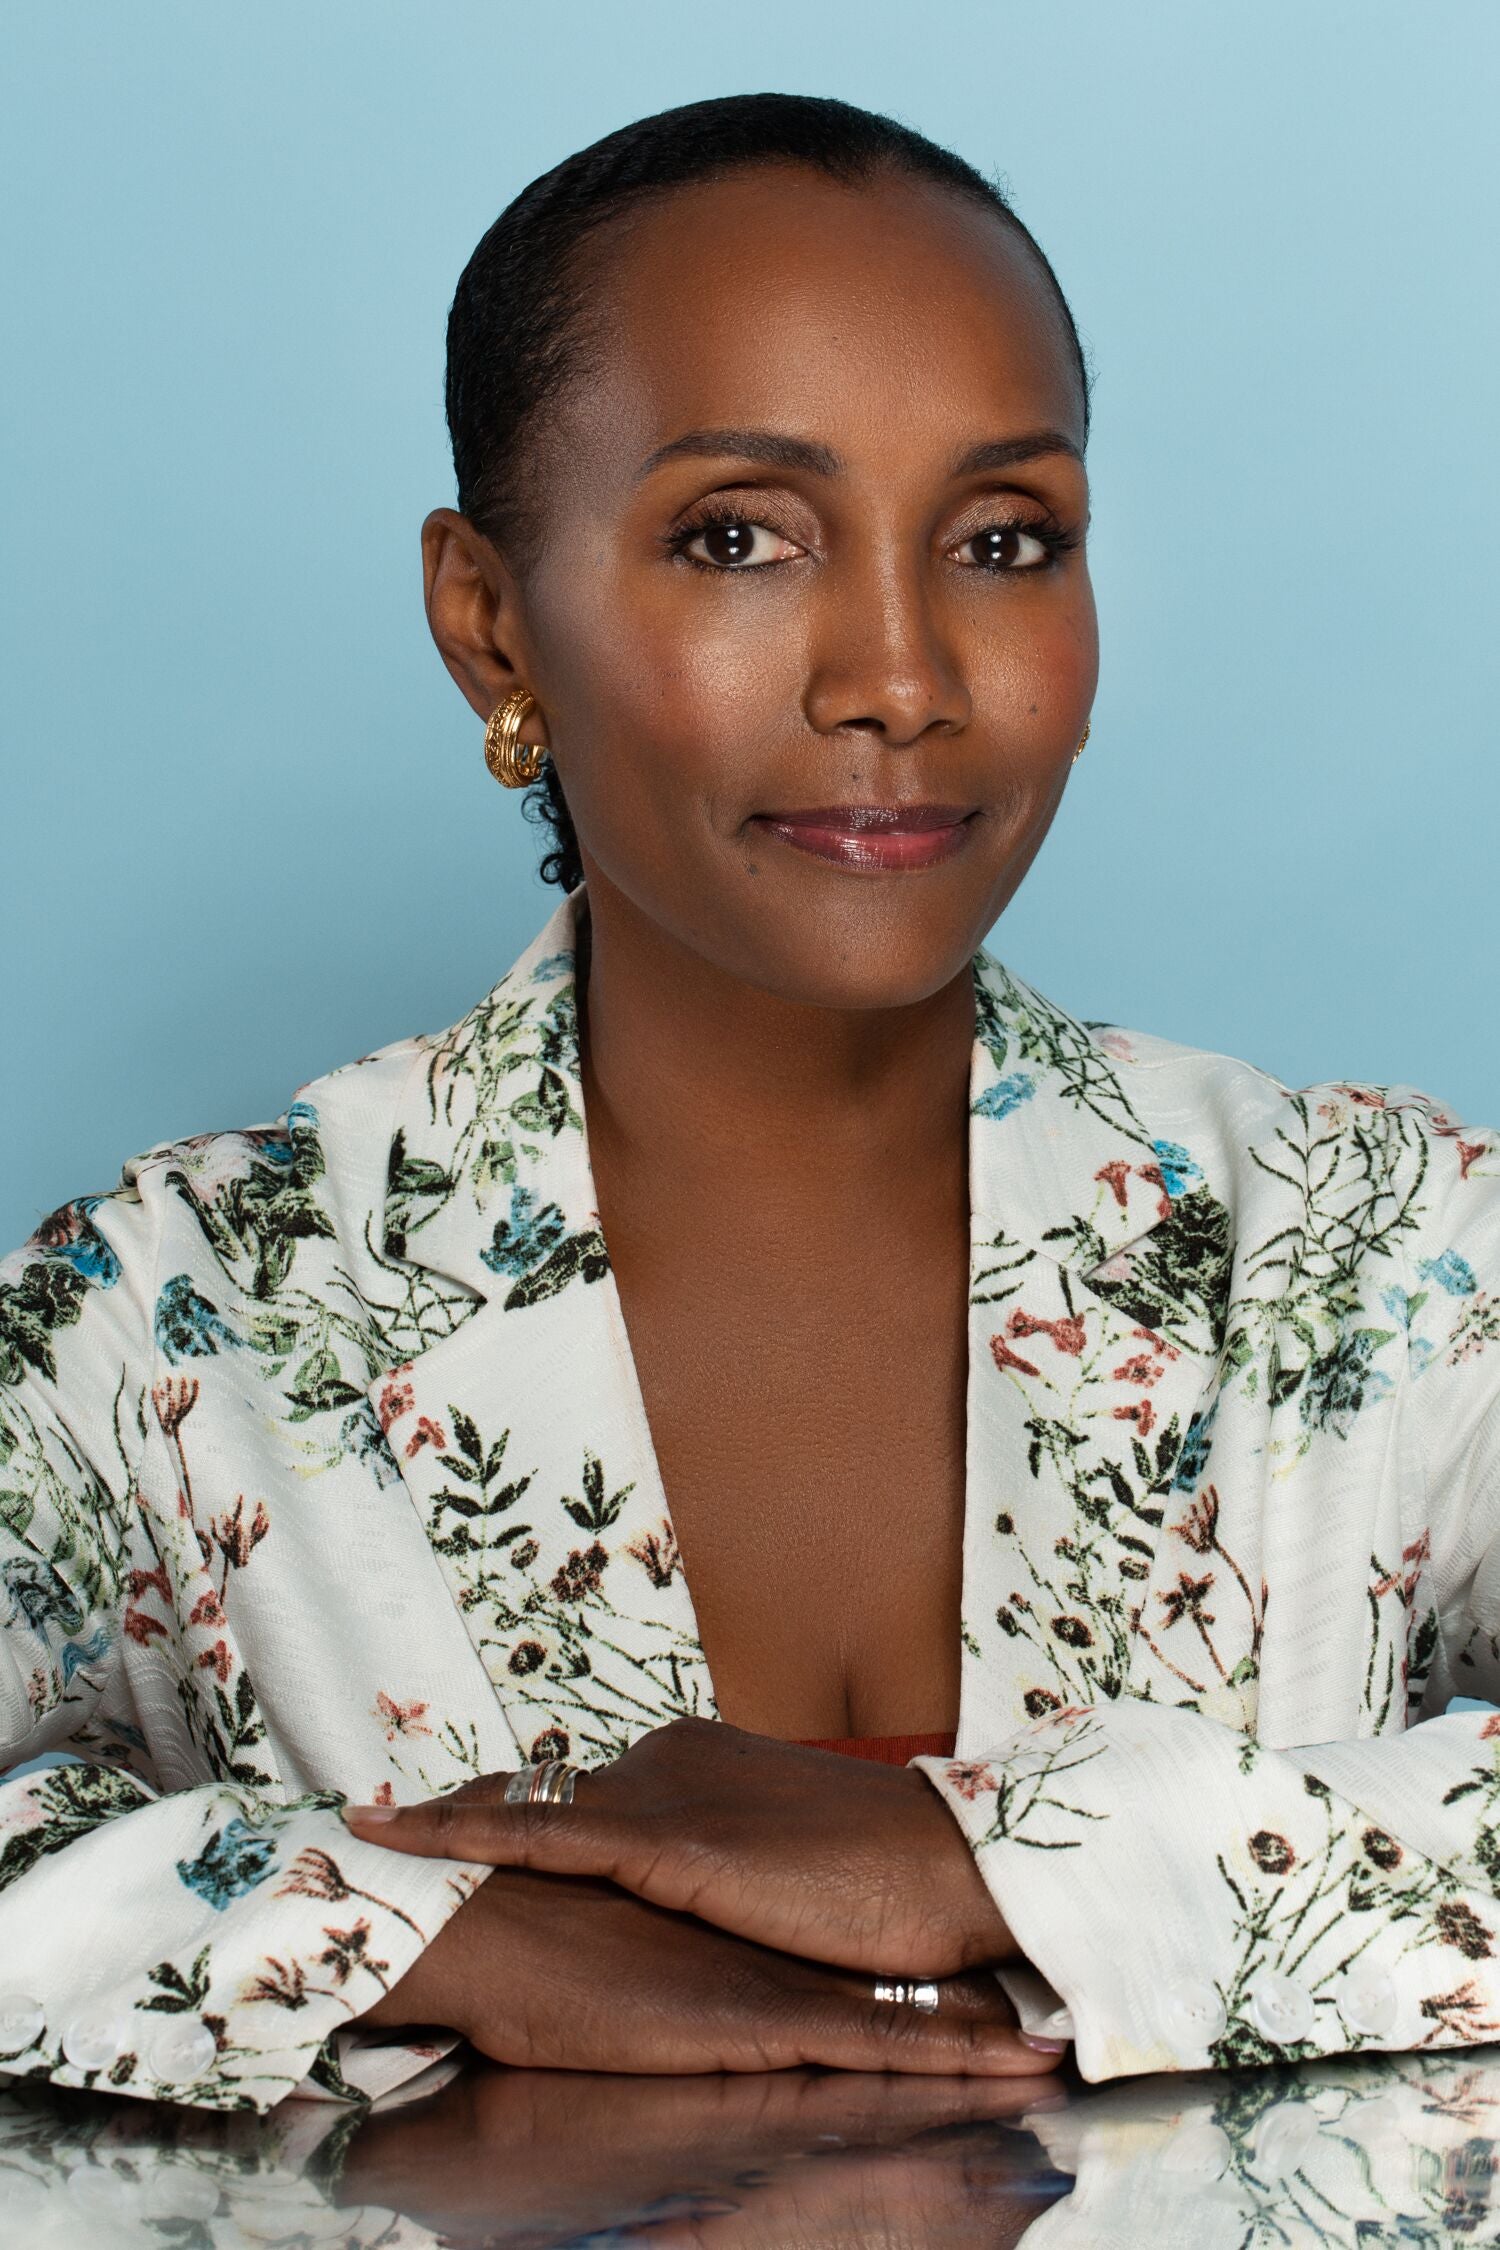 Unsun Cosmetics founder Katonya Breaux smiles at the camera, with her hands folded one on top of the other.  